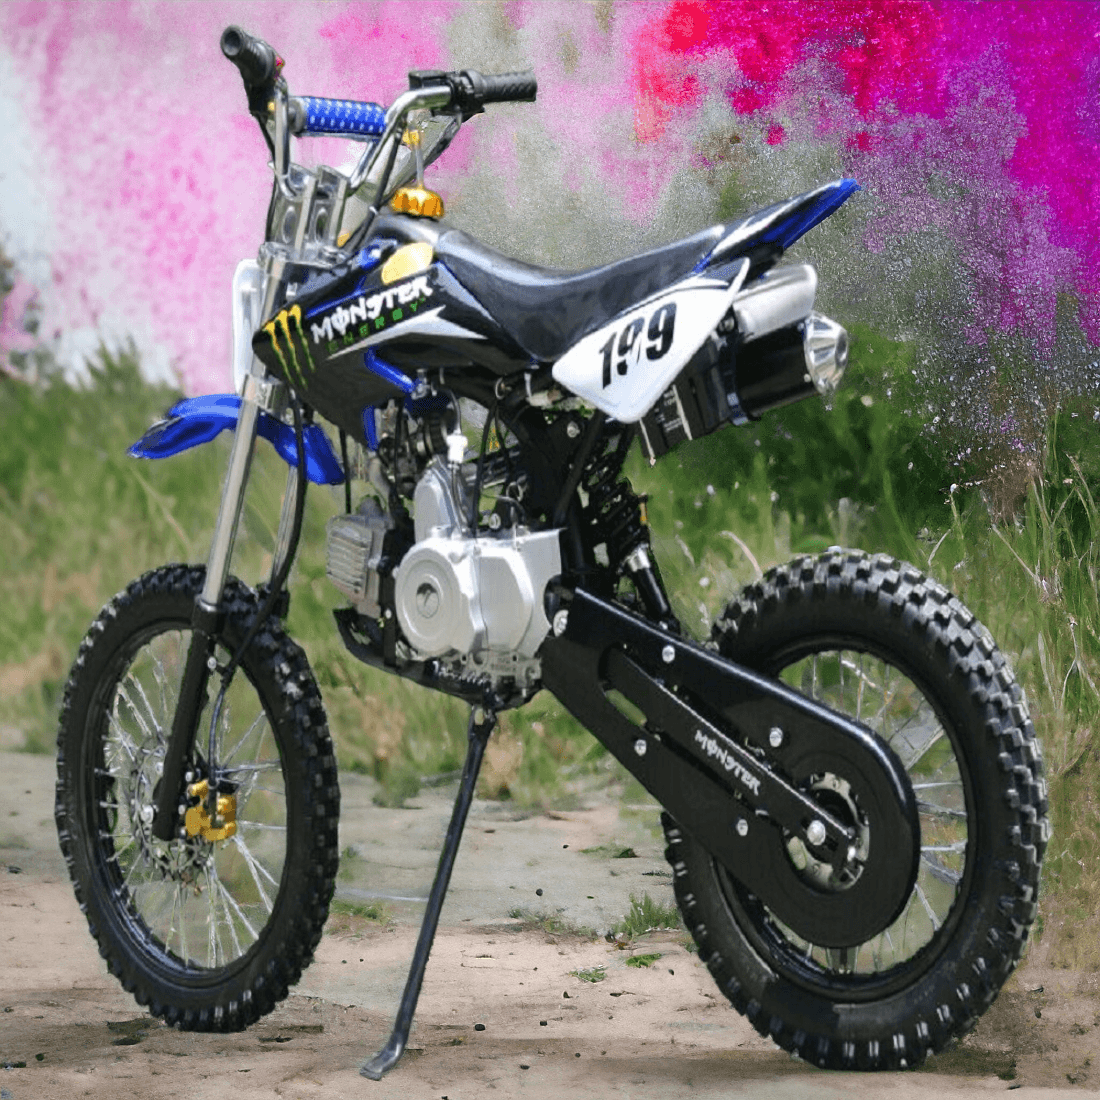 PATOYS | 125cc-Dirt bike Super Motocross for adults/youngsters 4 stroke engine for age group above 15 yrs - PATOYS